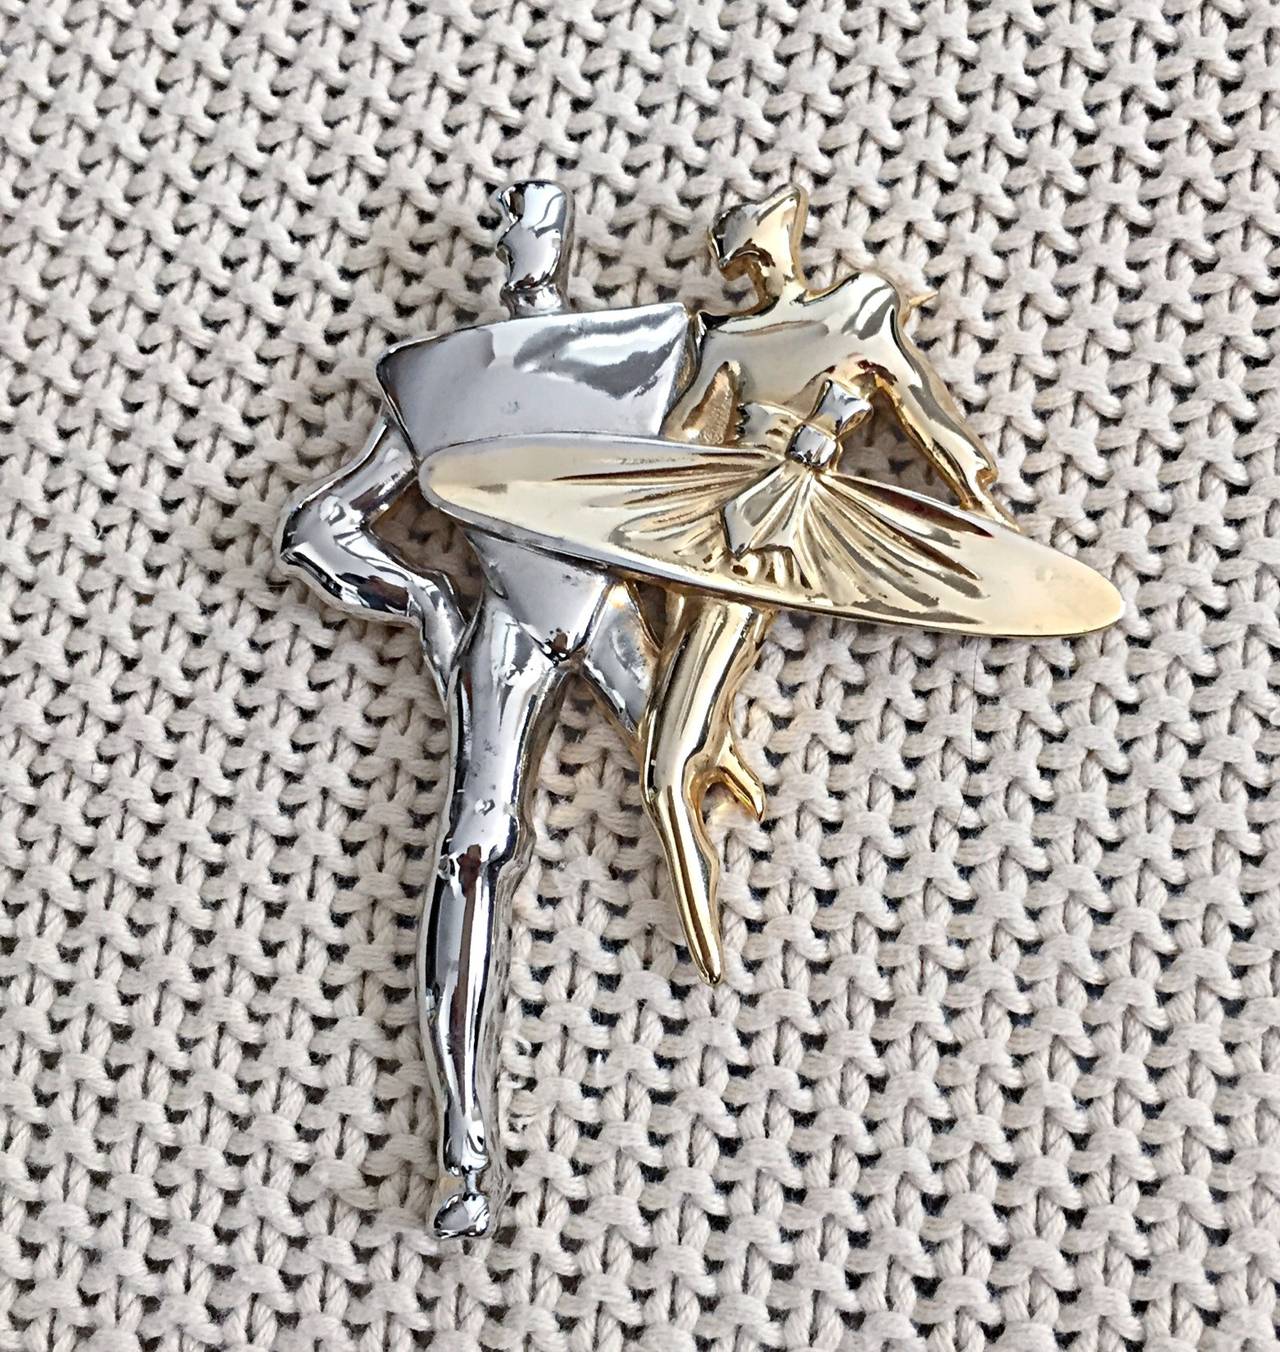 Absolutley incredible vintage Pierre Cardin modernist oversized brooch! Two-tone silver and gold, with dancing figures. A true statement piece, that adds just the right amount of 